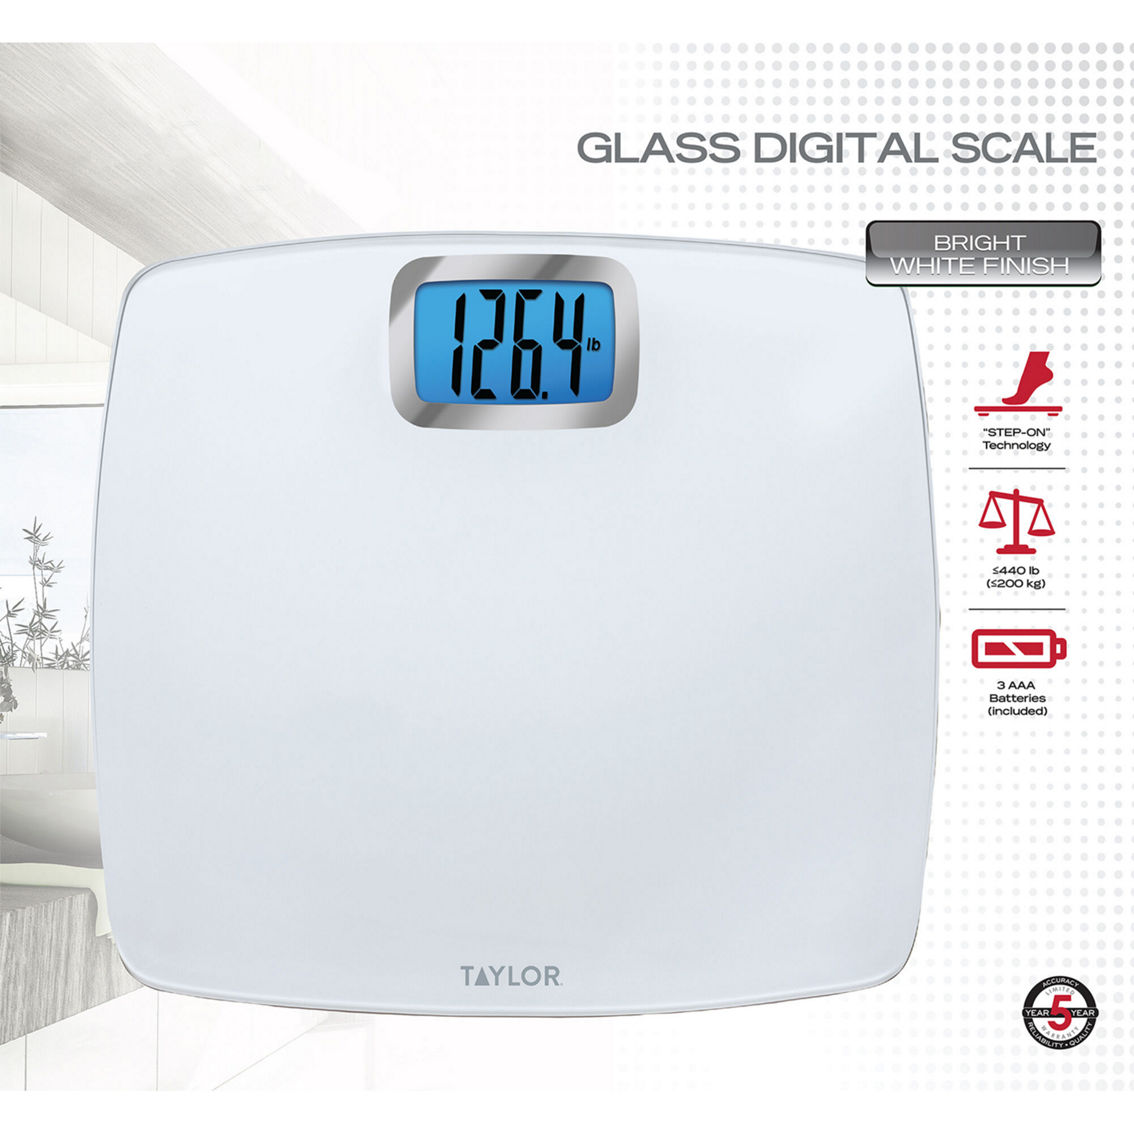 Taylor Pure White Digital Bathroom Scale - Image 6 of 6